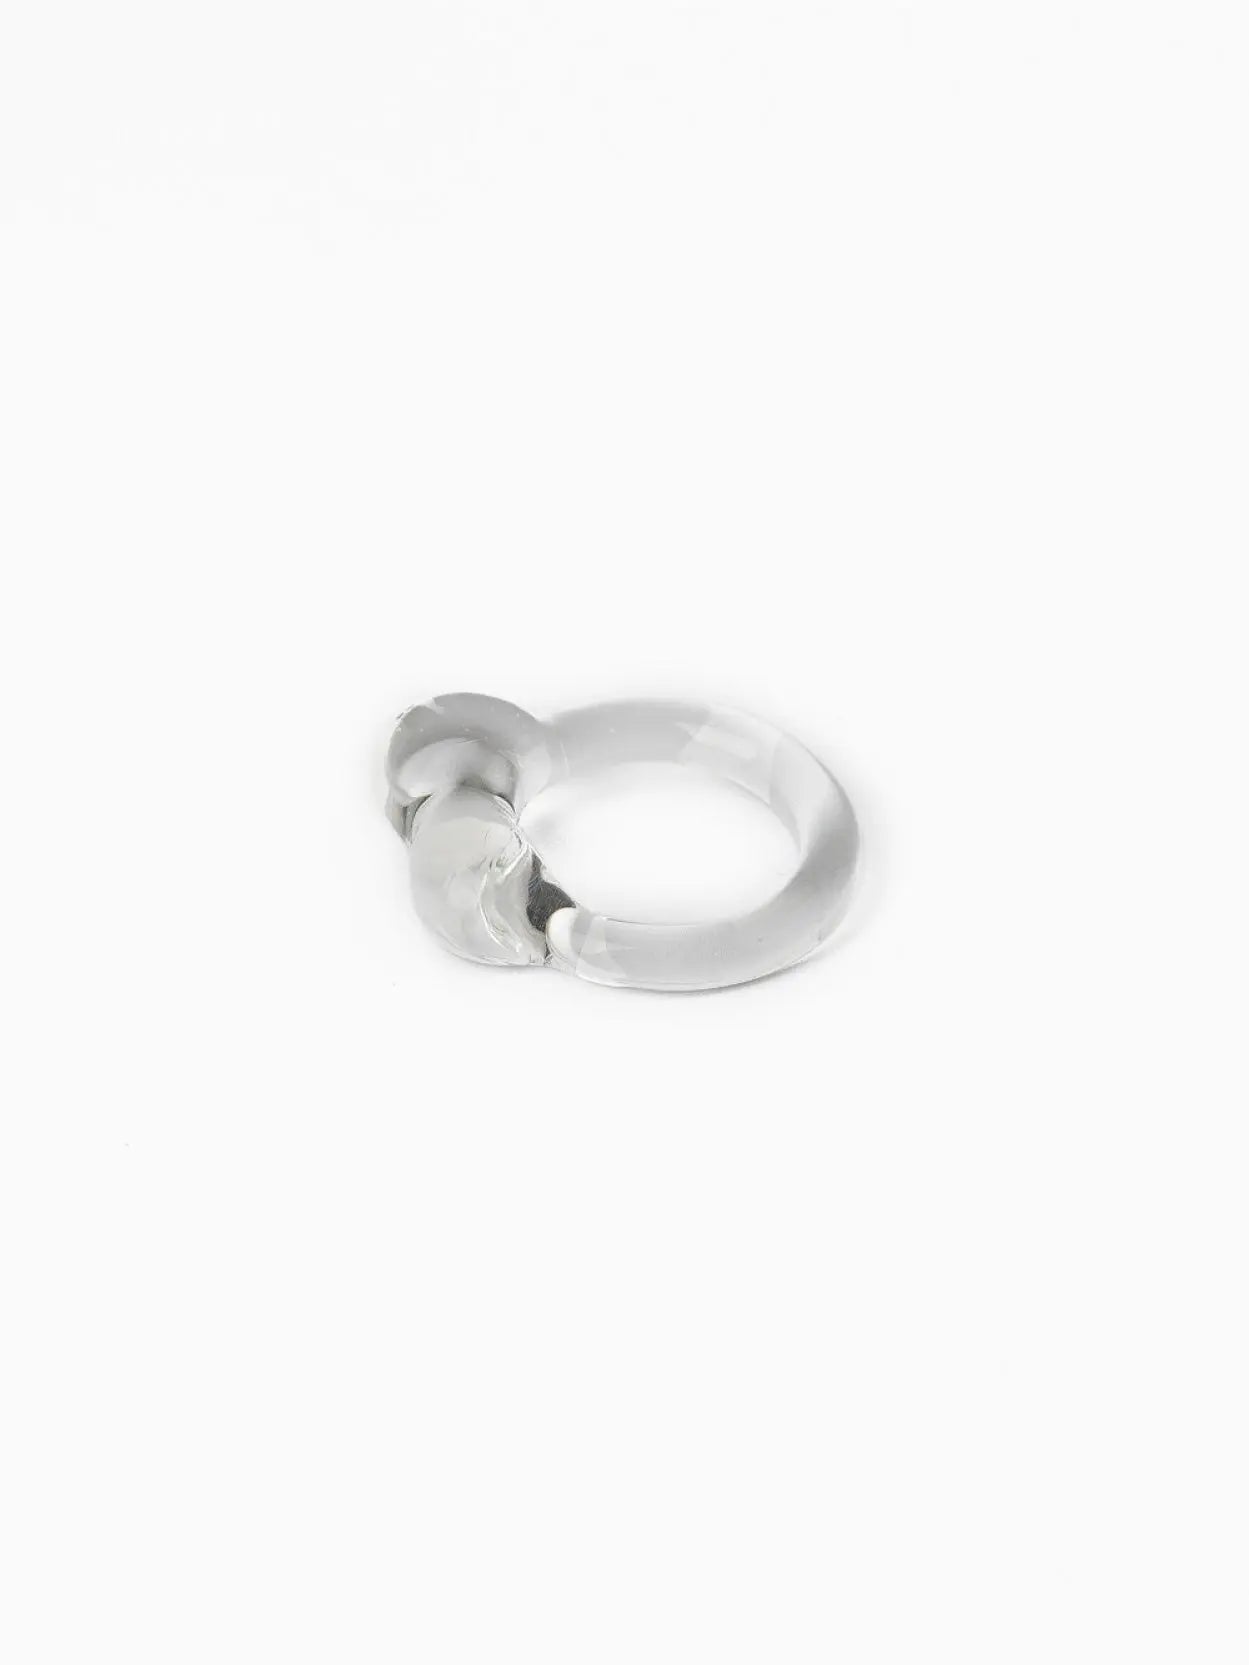 A sleek, modern silver ring with a rounded, abstract design on top, placed on a white background. The ring's minimalist style and smooth finish give it a contemporary and elegant appearance, perfect for showcasing in any Barcelona boutique or Bassalstore display. The Caju Ring Transparent by Nathalie Schreckenberg exemplifies these qualities beautifully.